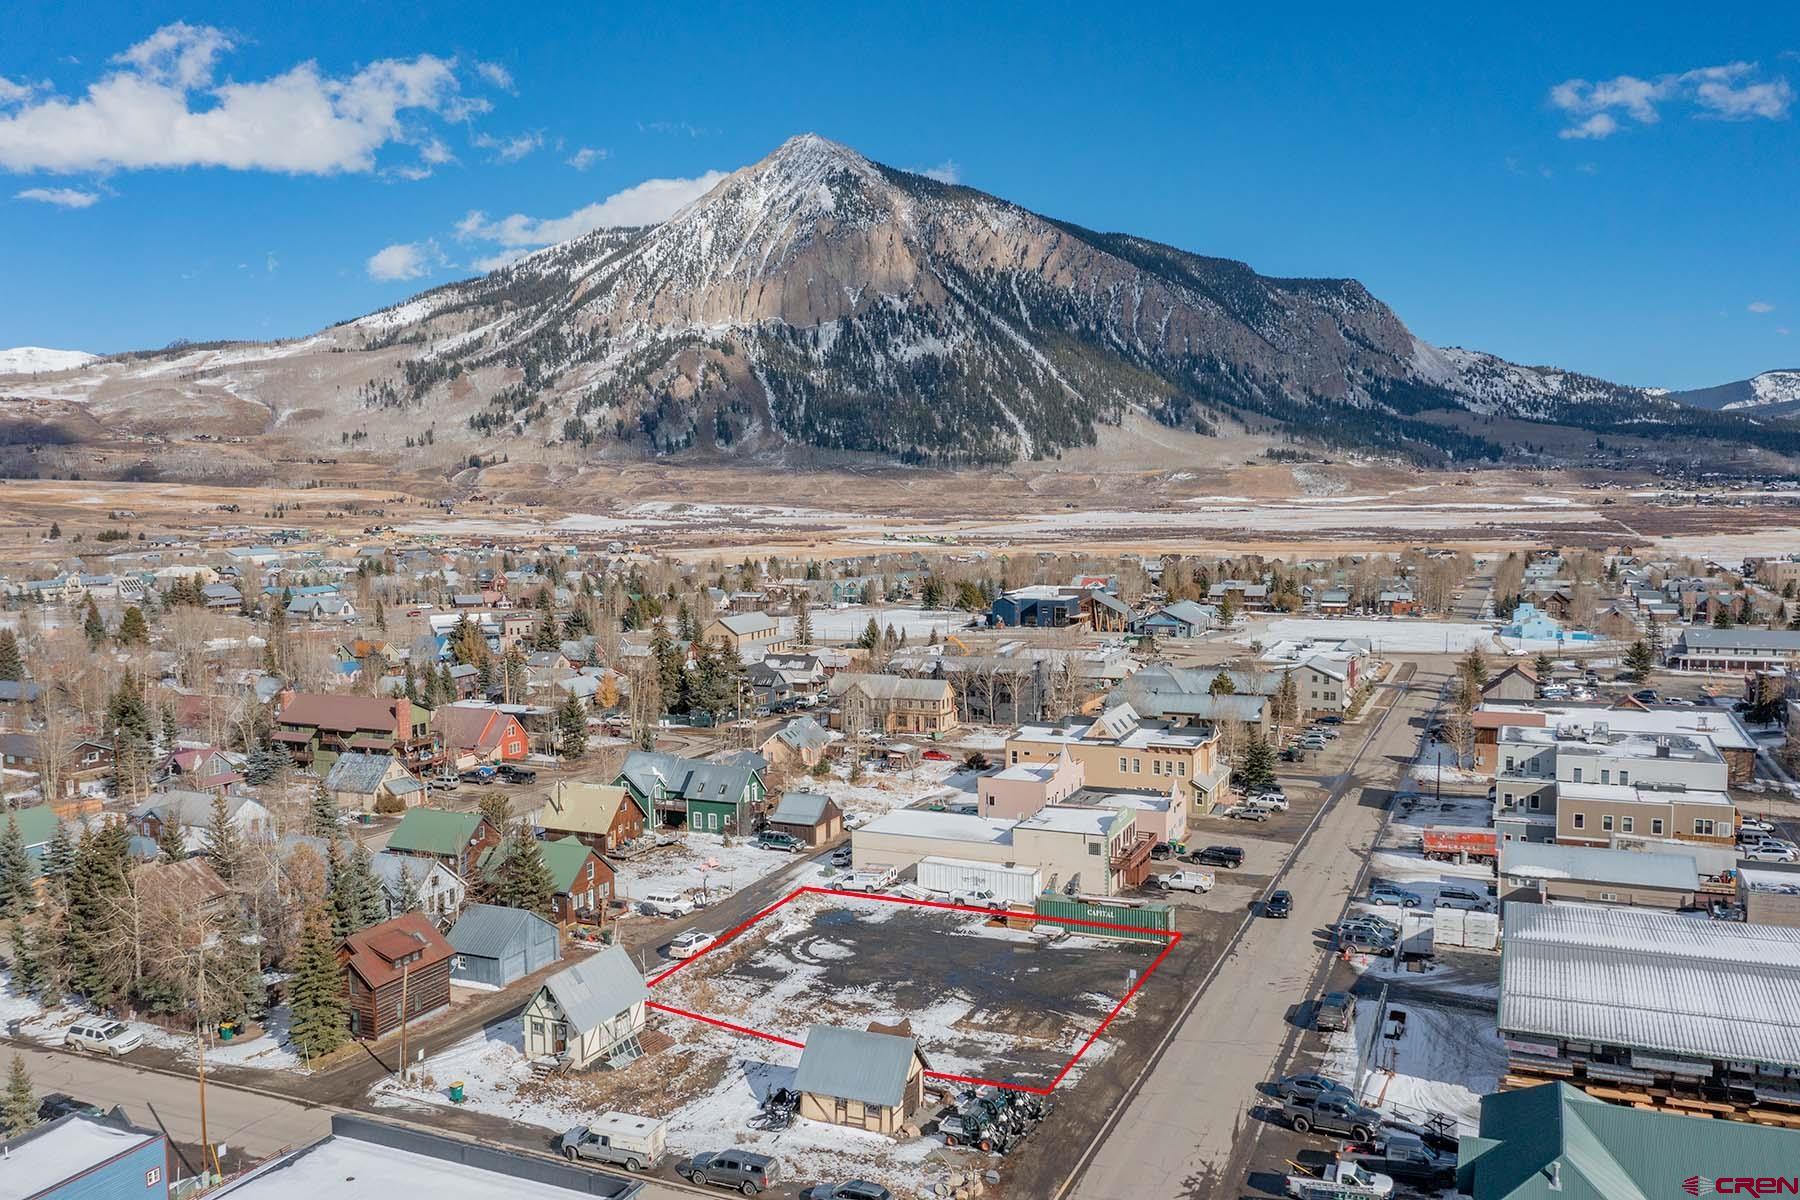 409,411 413 Belleview Avenue, Crested Butte, CO 